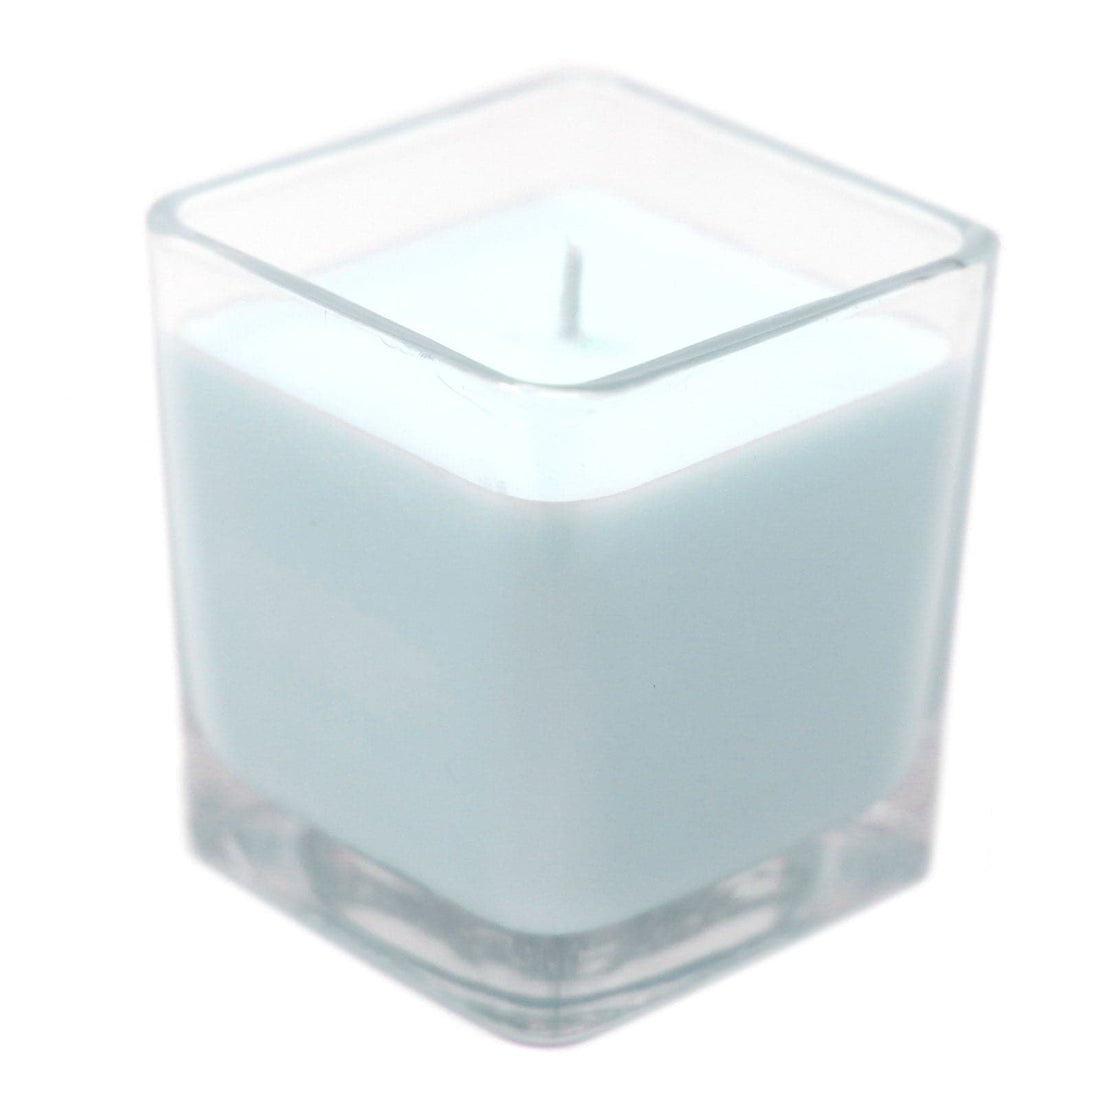 White Label Soy Wax Jar Candle - Baby Powder - best price from Maltashopper.com WLSOYC-09